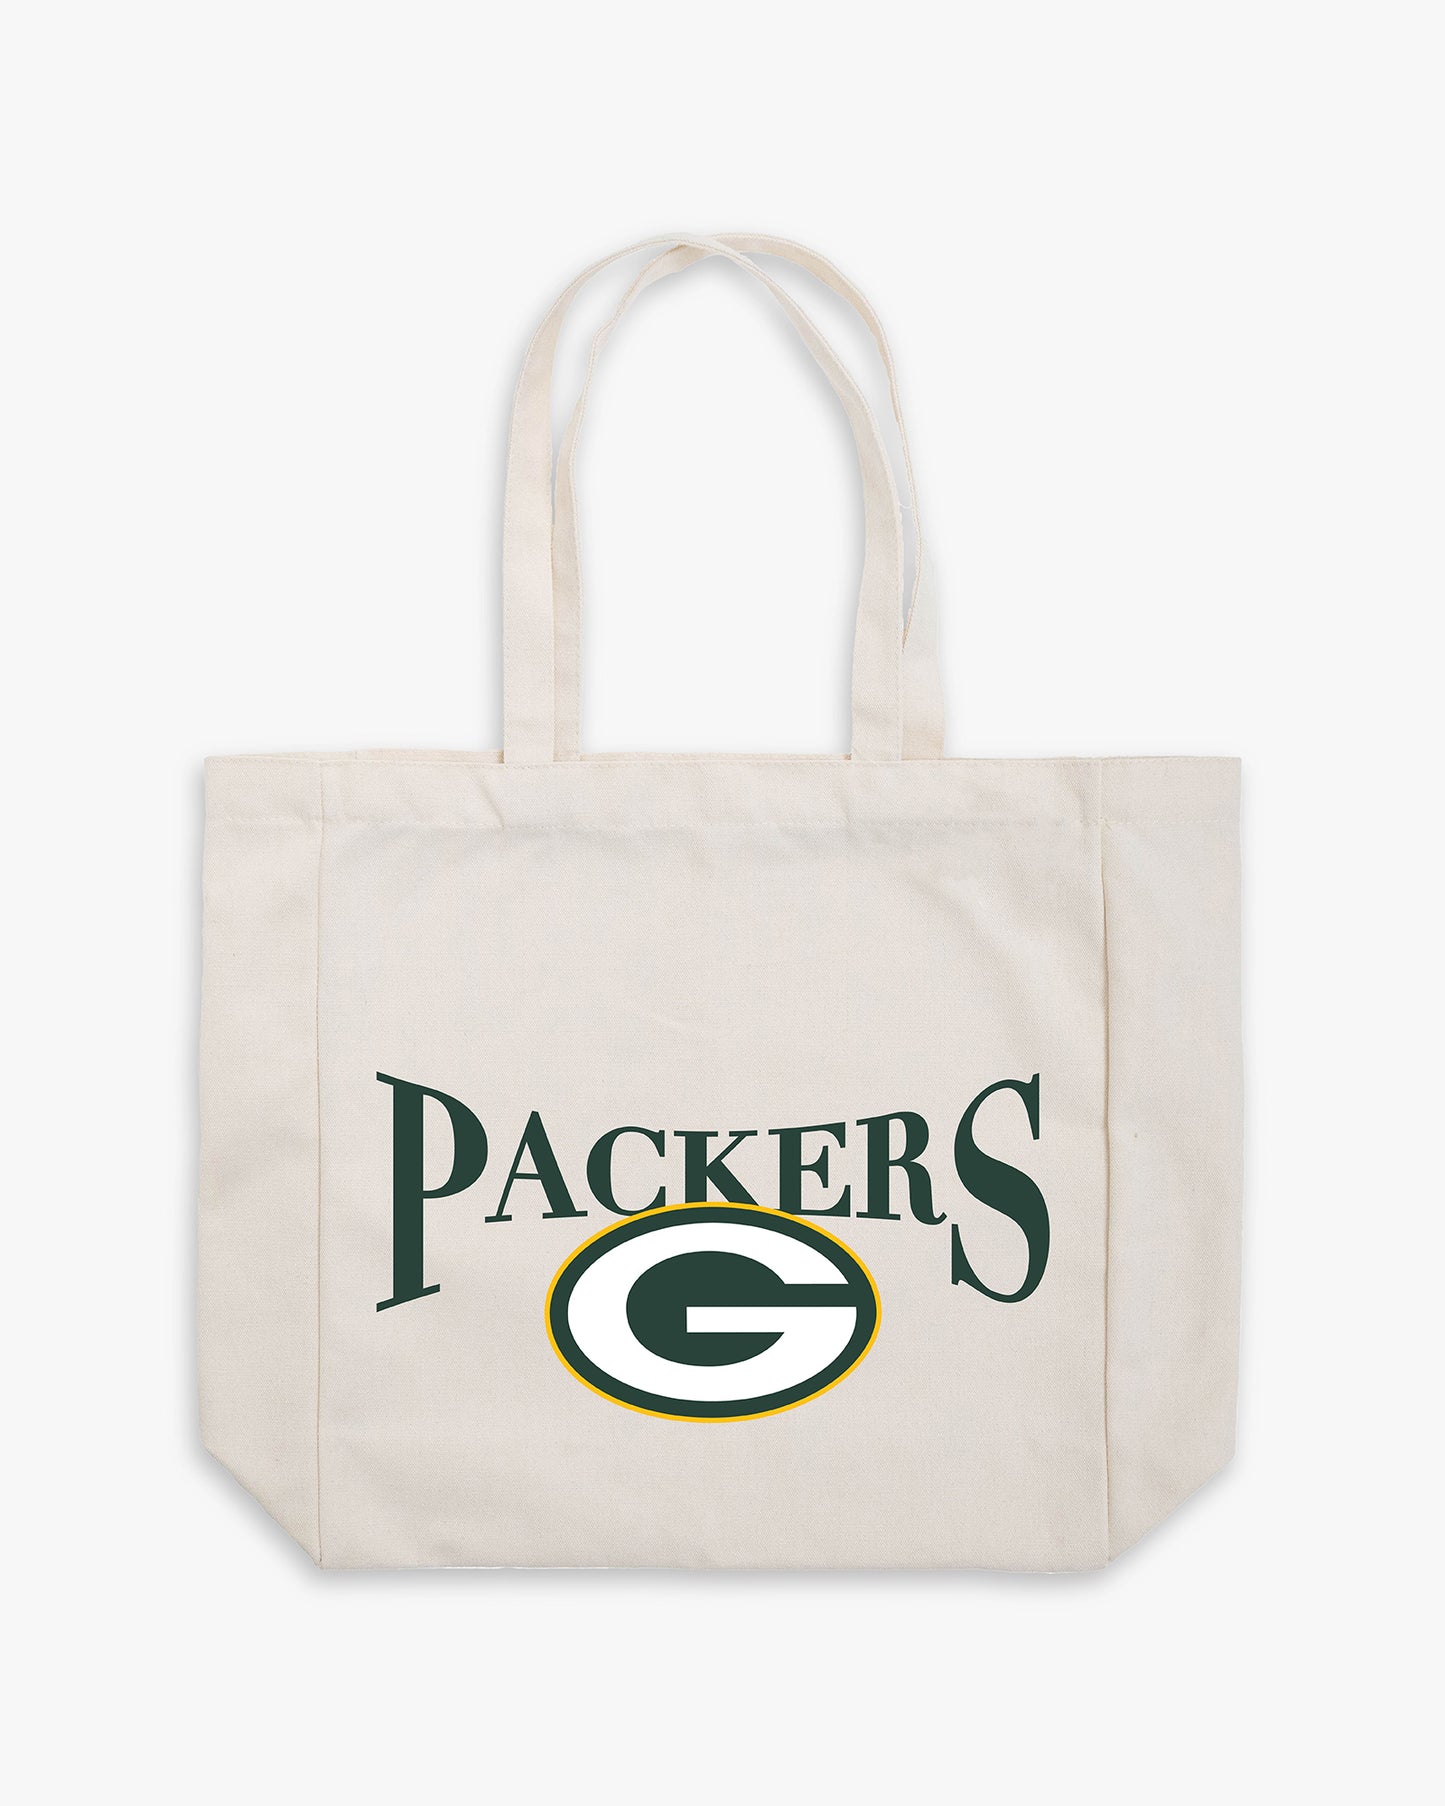 Green Bay Packers NFL Canvas Tote Bag